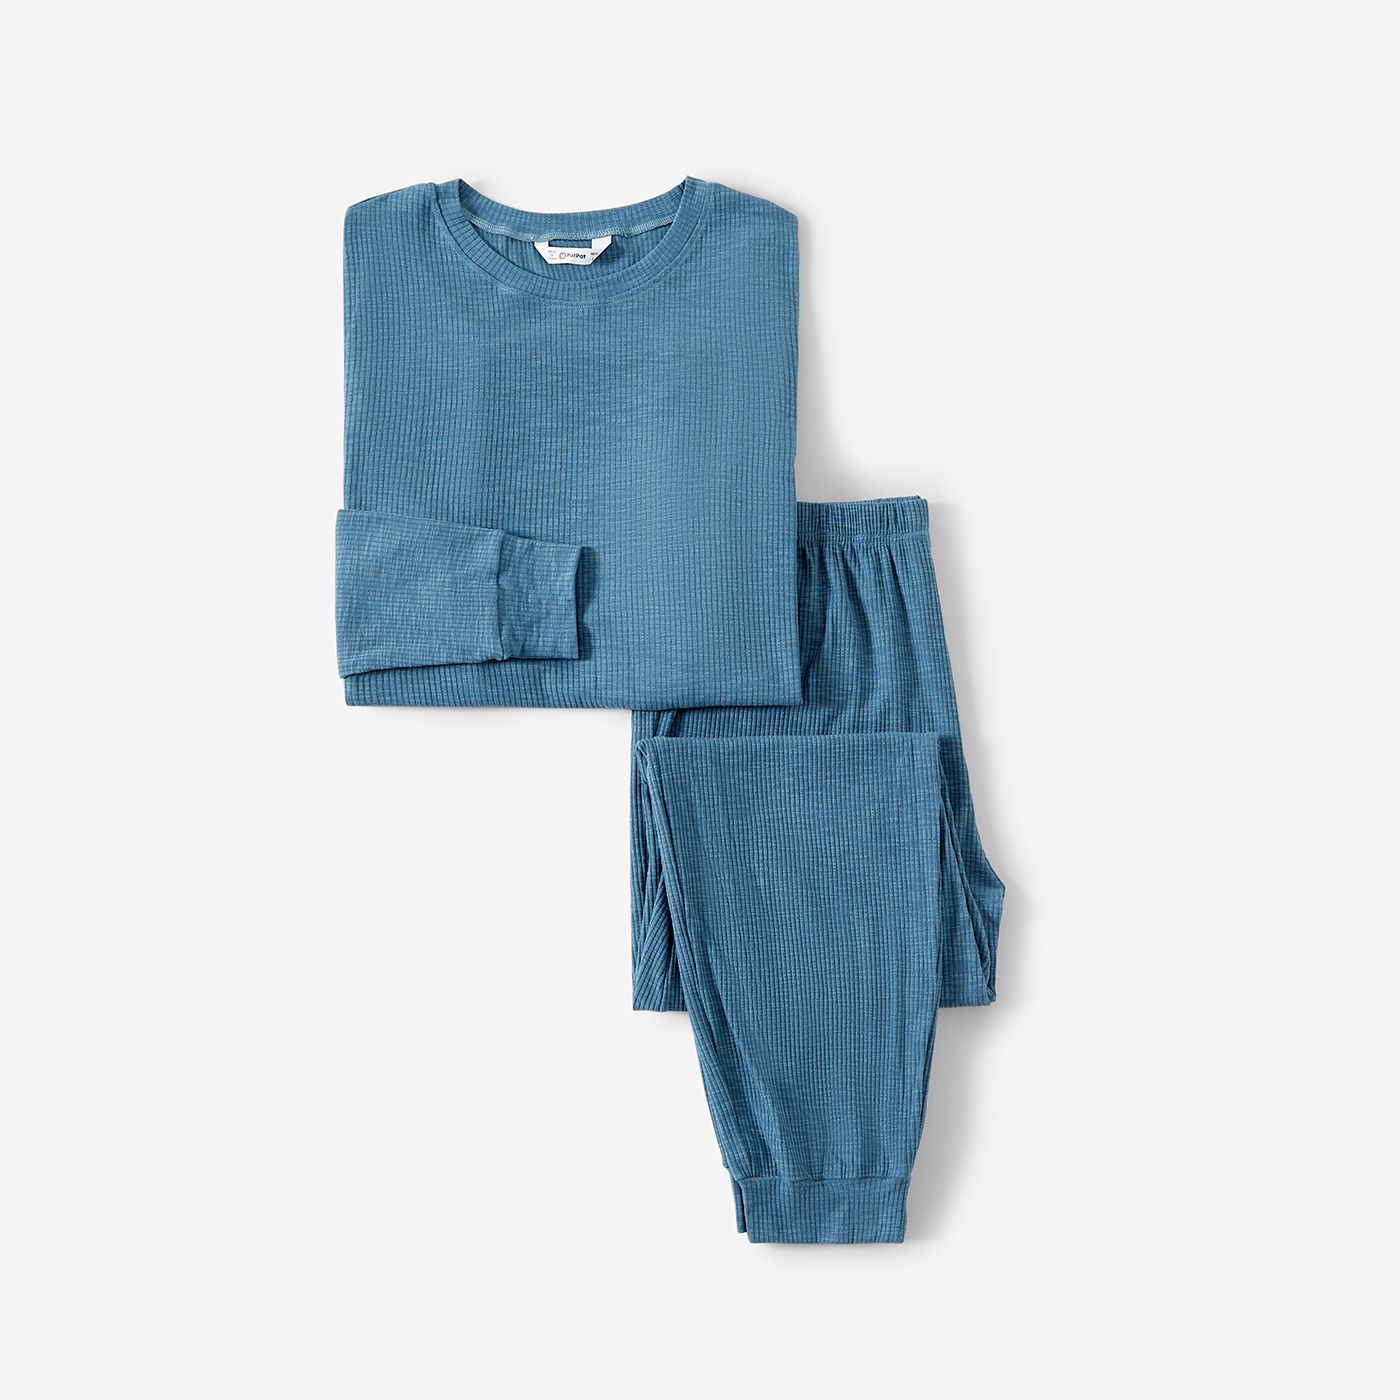 Family Matching Solid Color Long Sleeve Snug-fitting Pajamas Sets